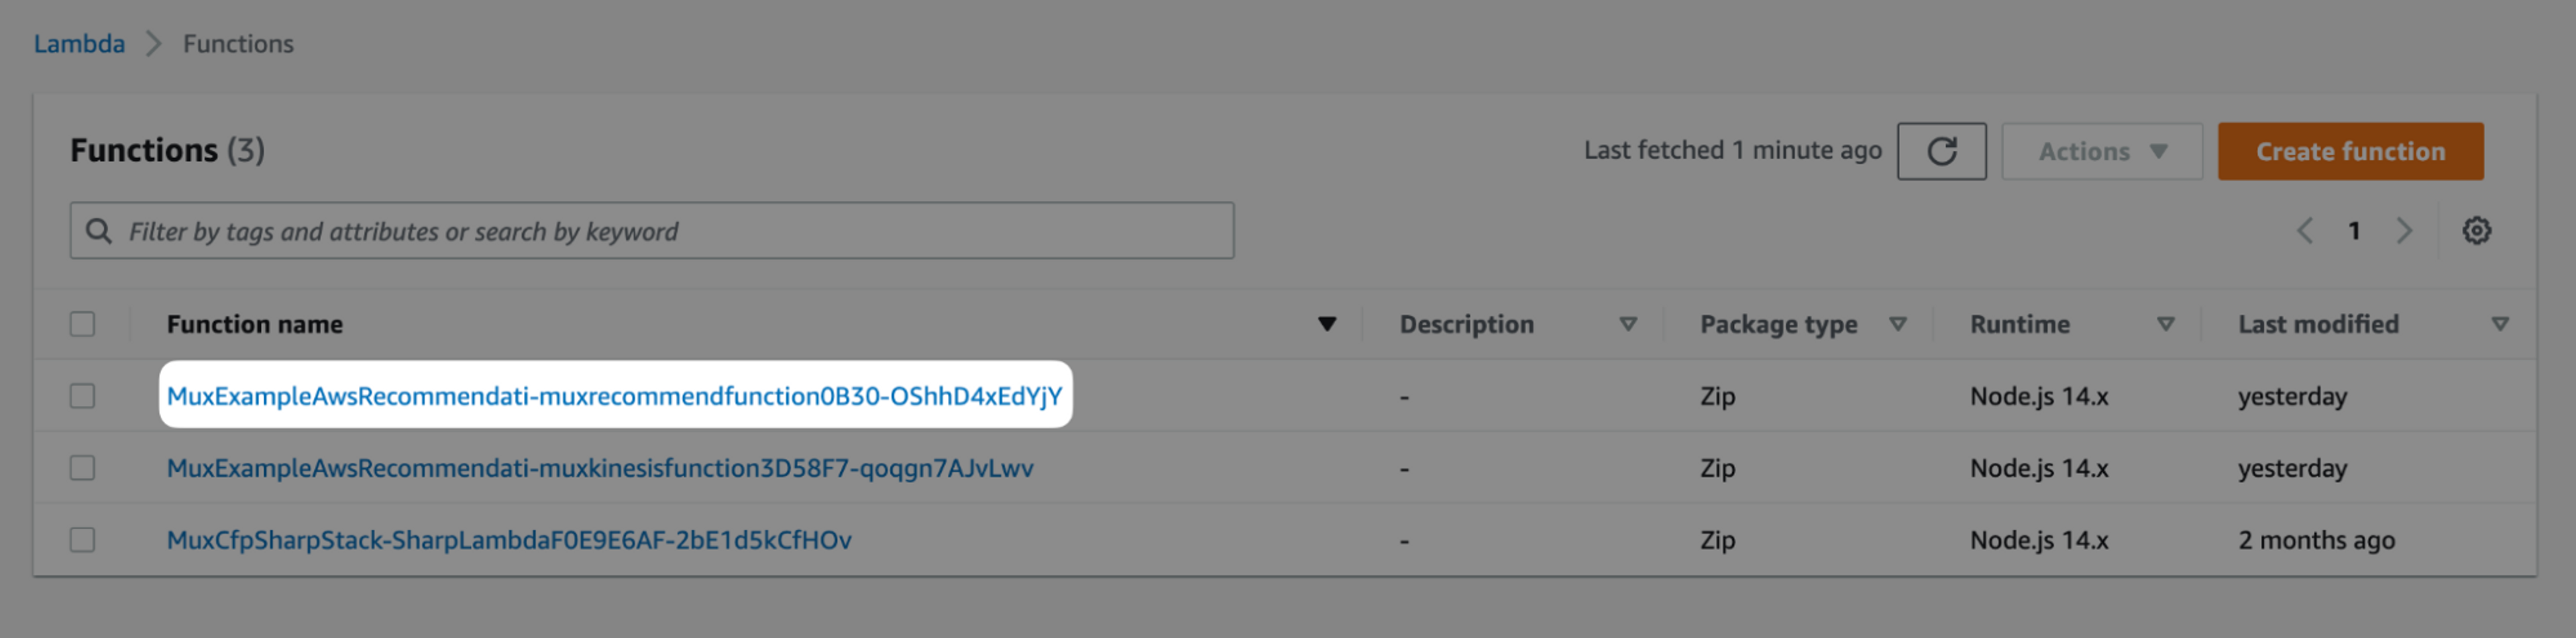 A screenshot of the AWS Lambda dashboard showing a highlighted function name